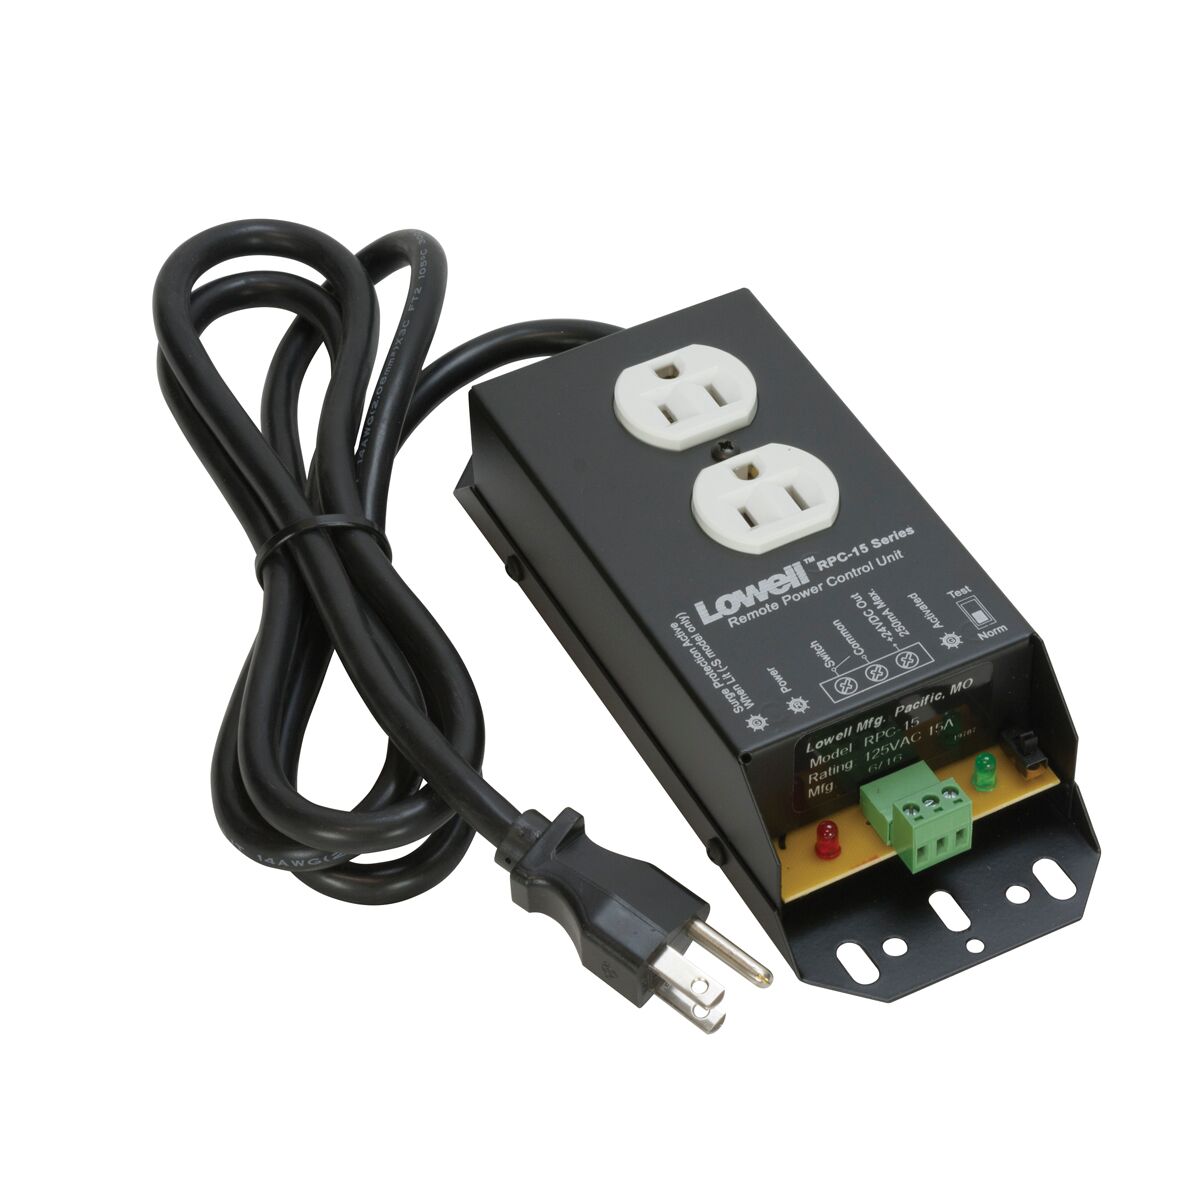 Lowell RPC-15 Remote Power Control